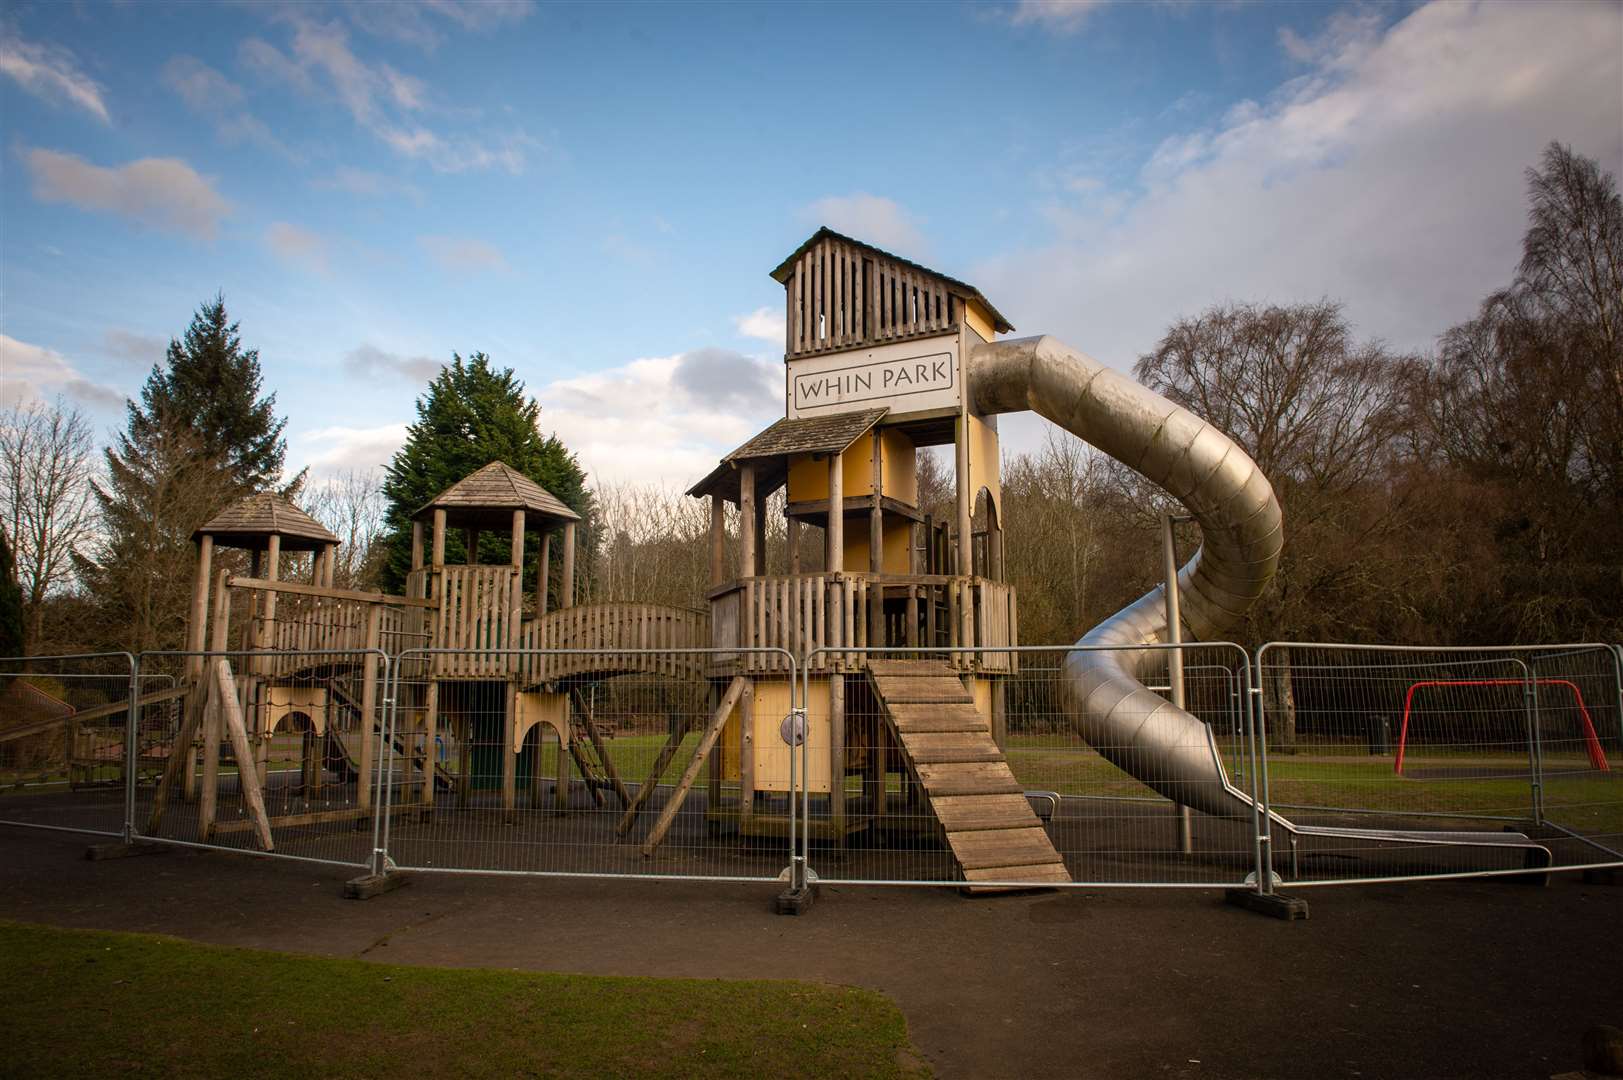 Highland Council previously closed the huge slide system at Whin Park.